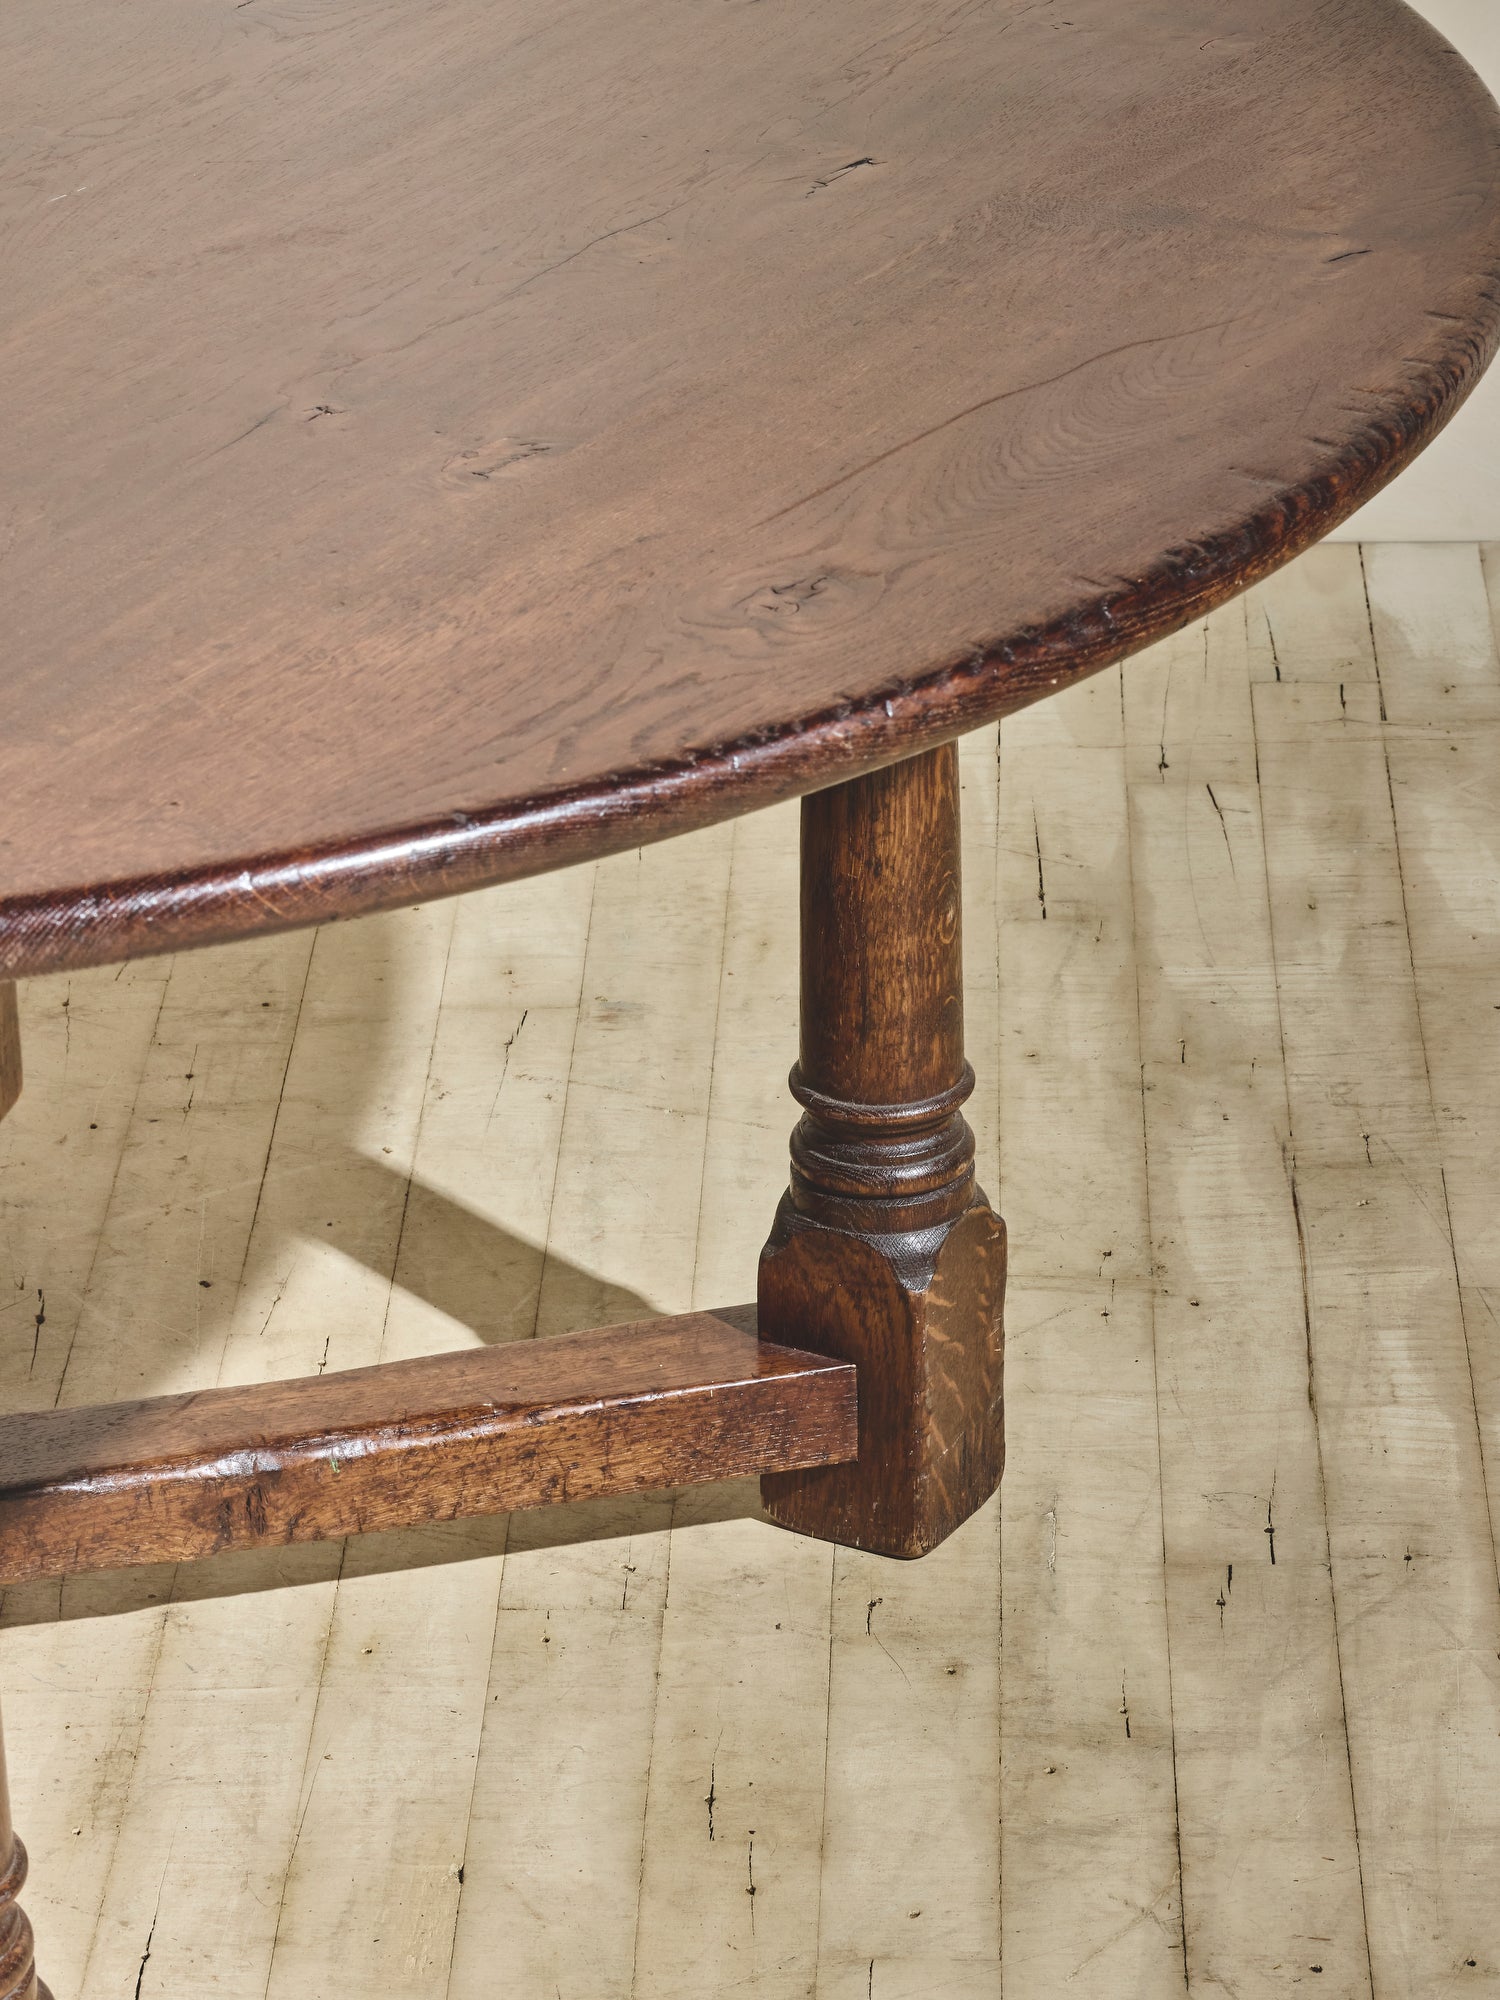 English Dining Table